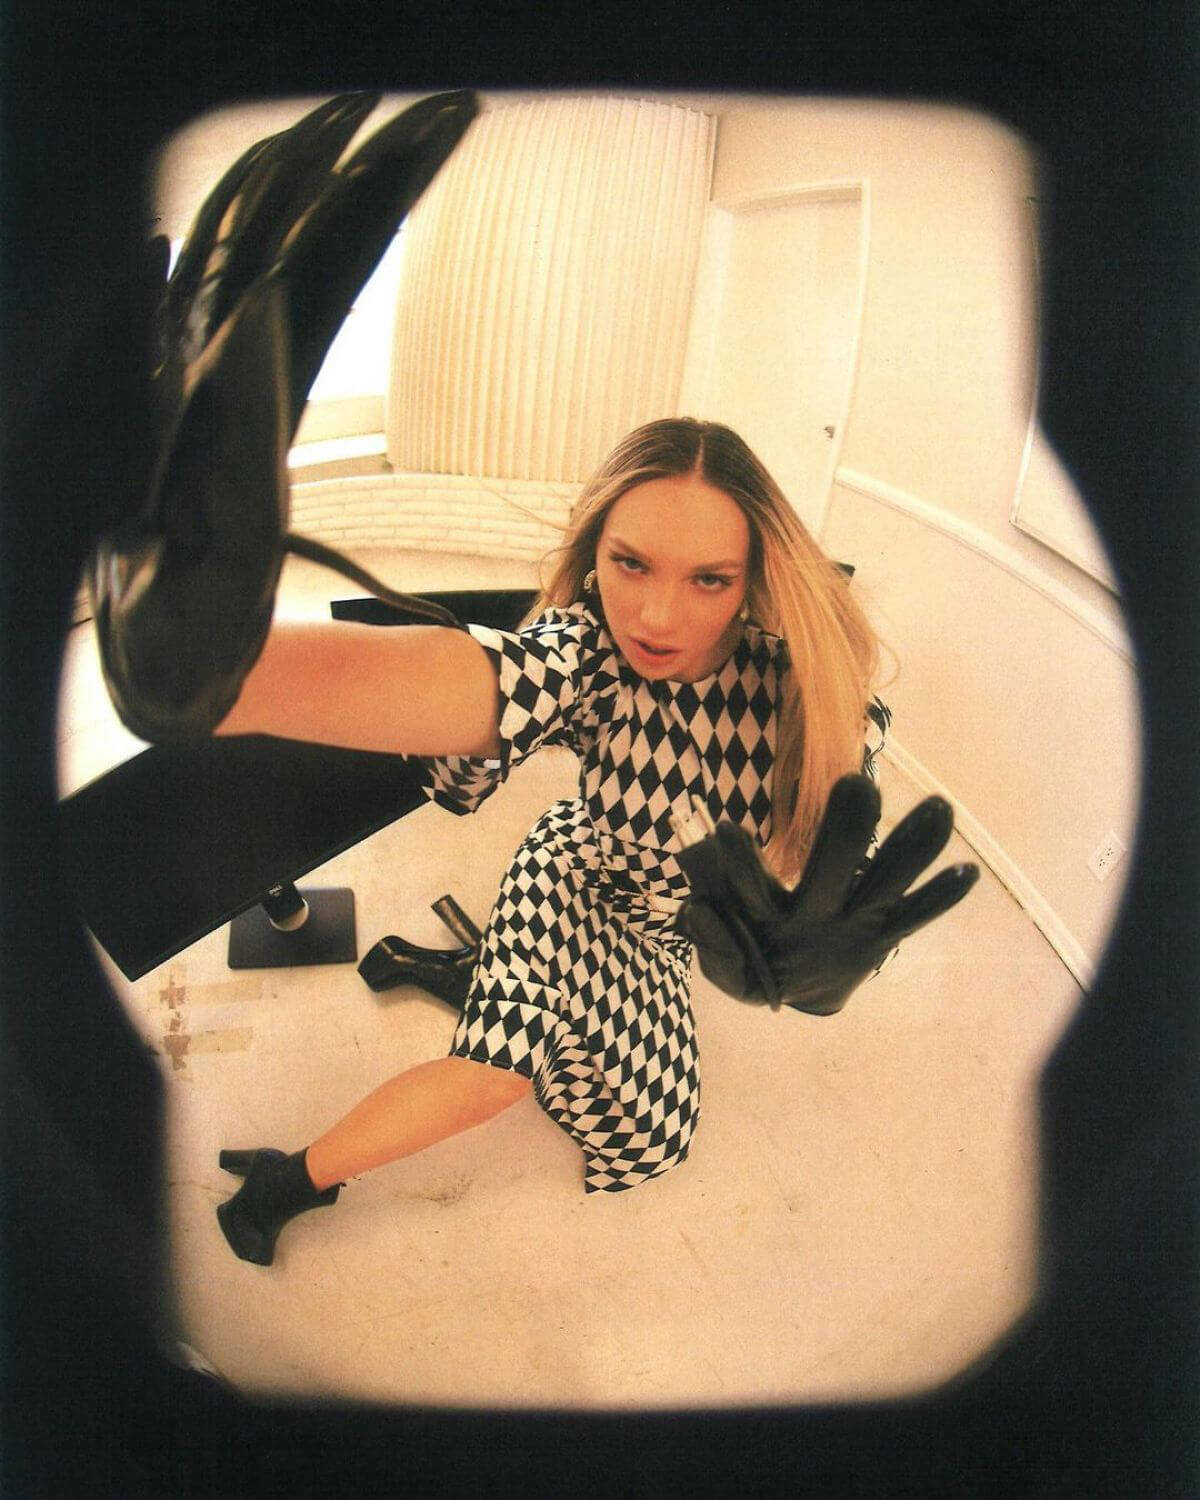 Maddie Ziegler Looks Stylish in a Photoshoot, March 2021 2